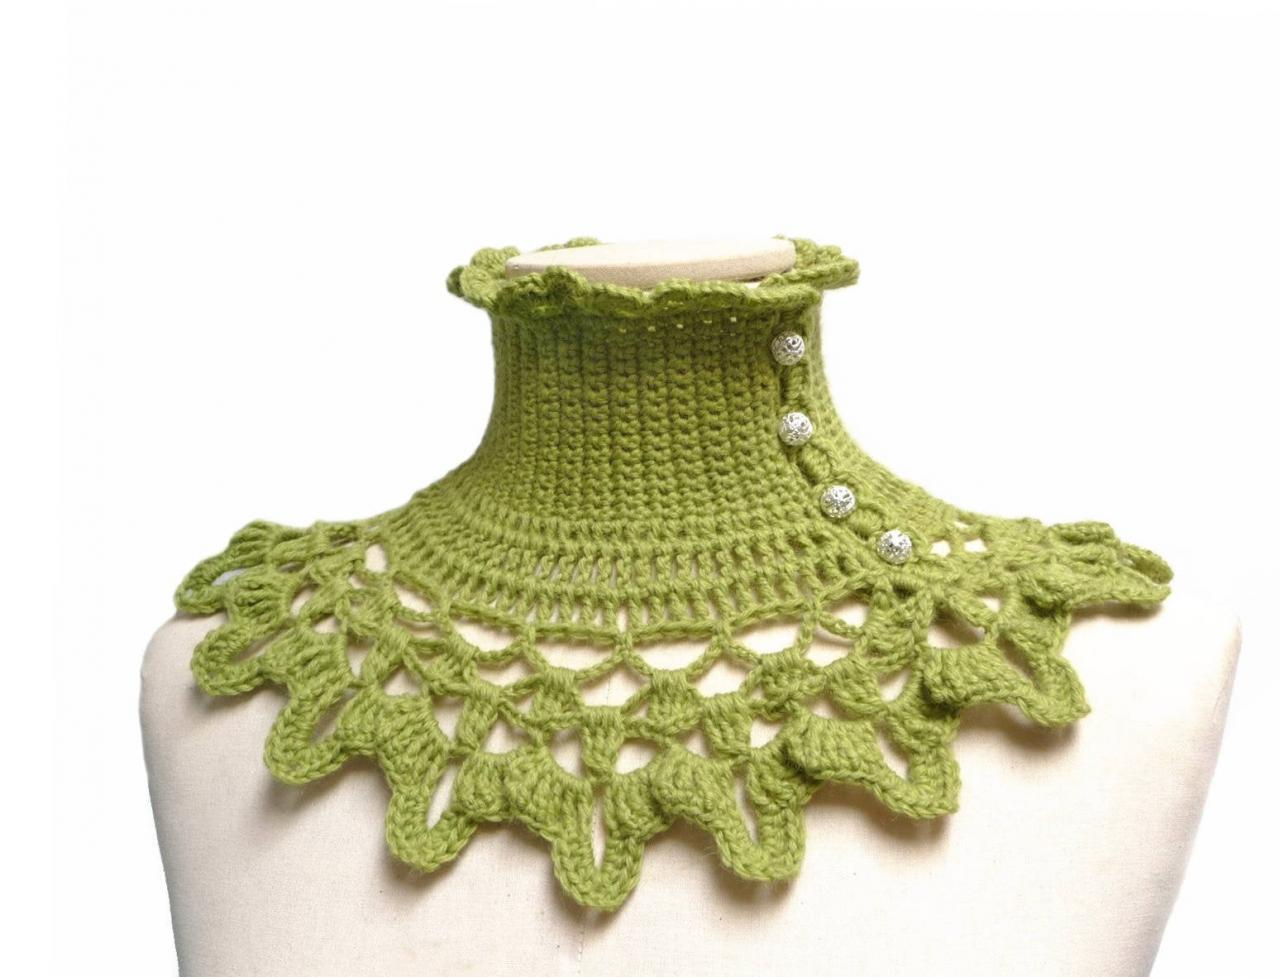 Victorian Wool Collar Neck Warmer, Crochet Green Boho Style Turtleneck Scarf, Romantic Gothic Neck Piece, Mom Sister And Friend Gift